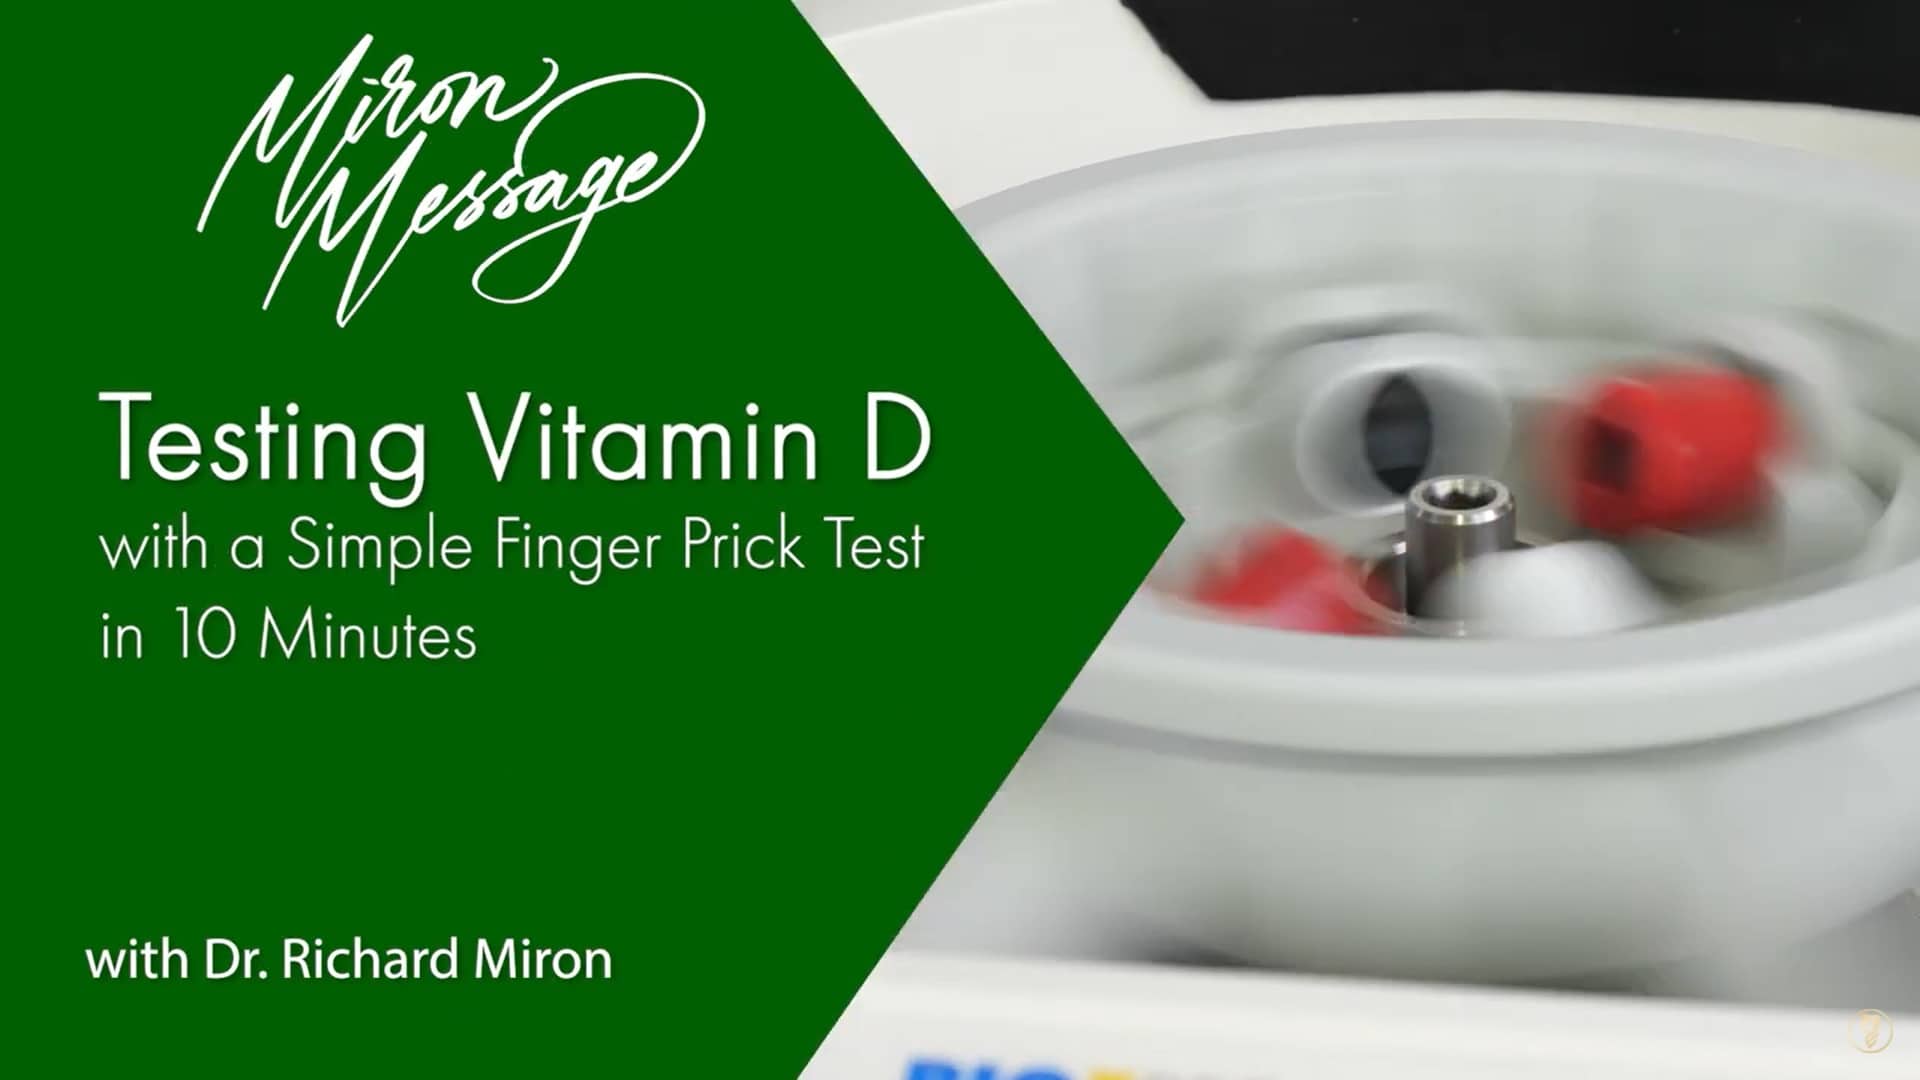 Miron Message: Testing Vitamin D with a Simple Finger Prick Test in 10 minutes Image